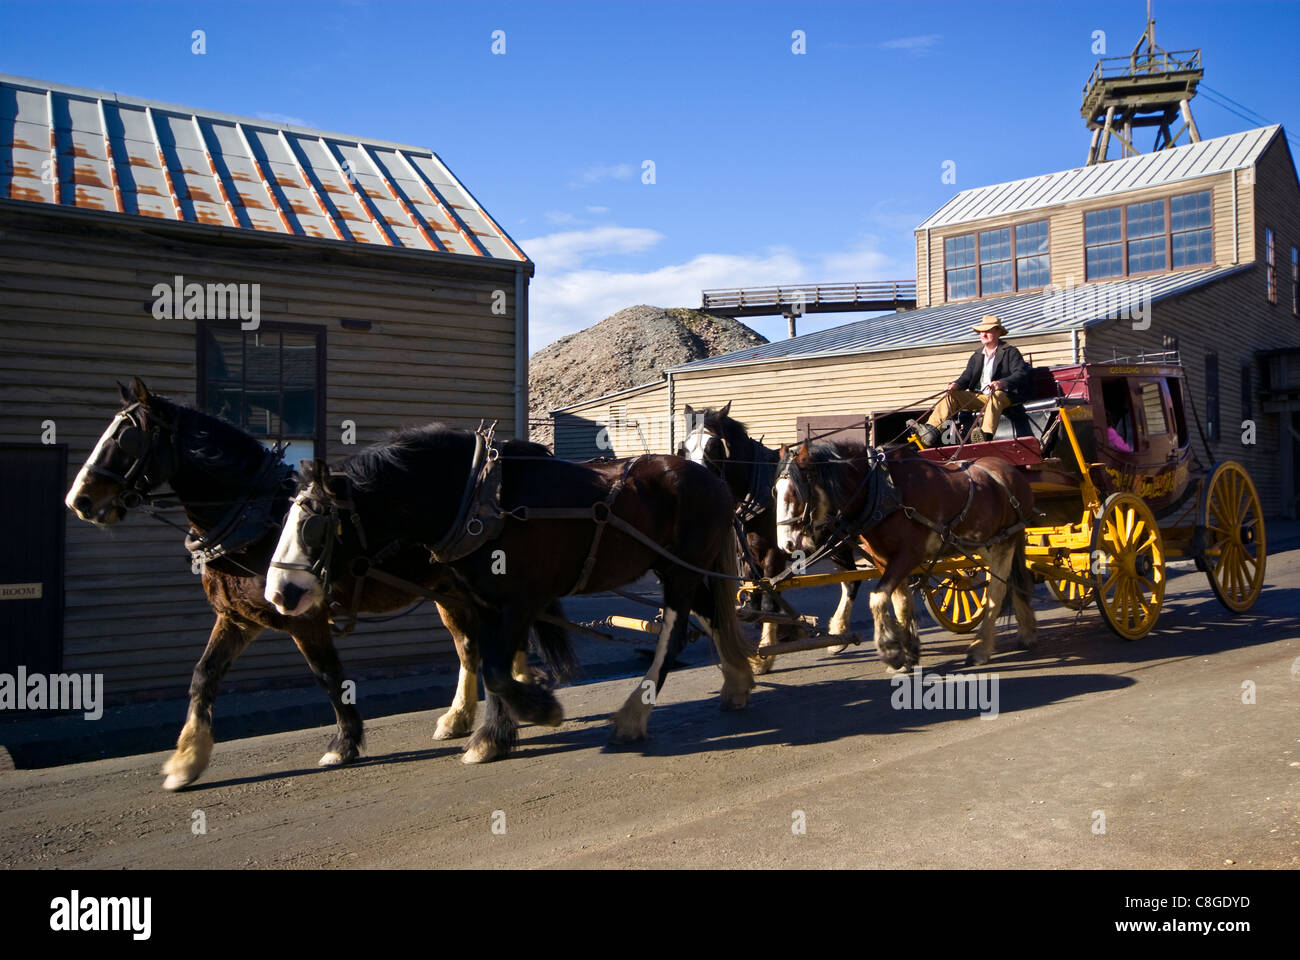 A team of Clydesdale horses pull a stagecoach in a gold mining town. Stock Photo